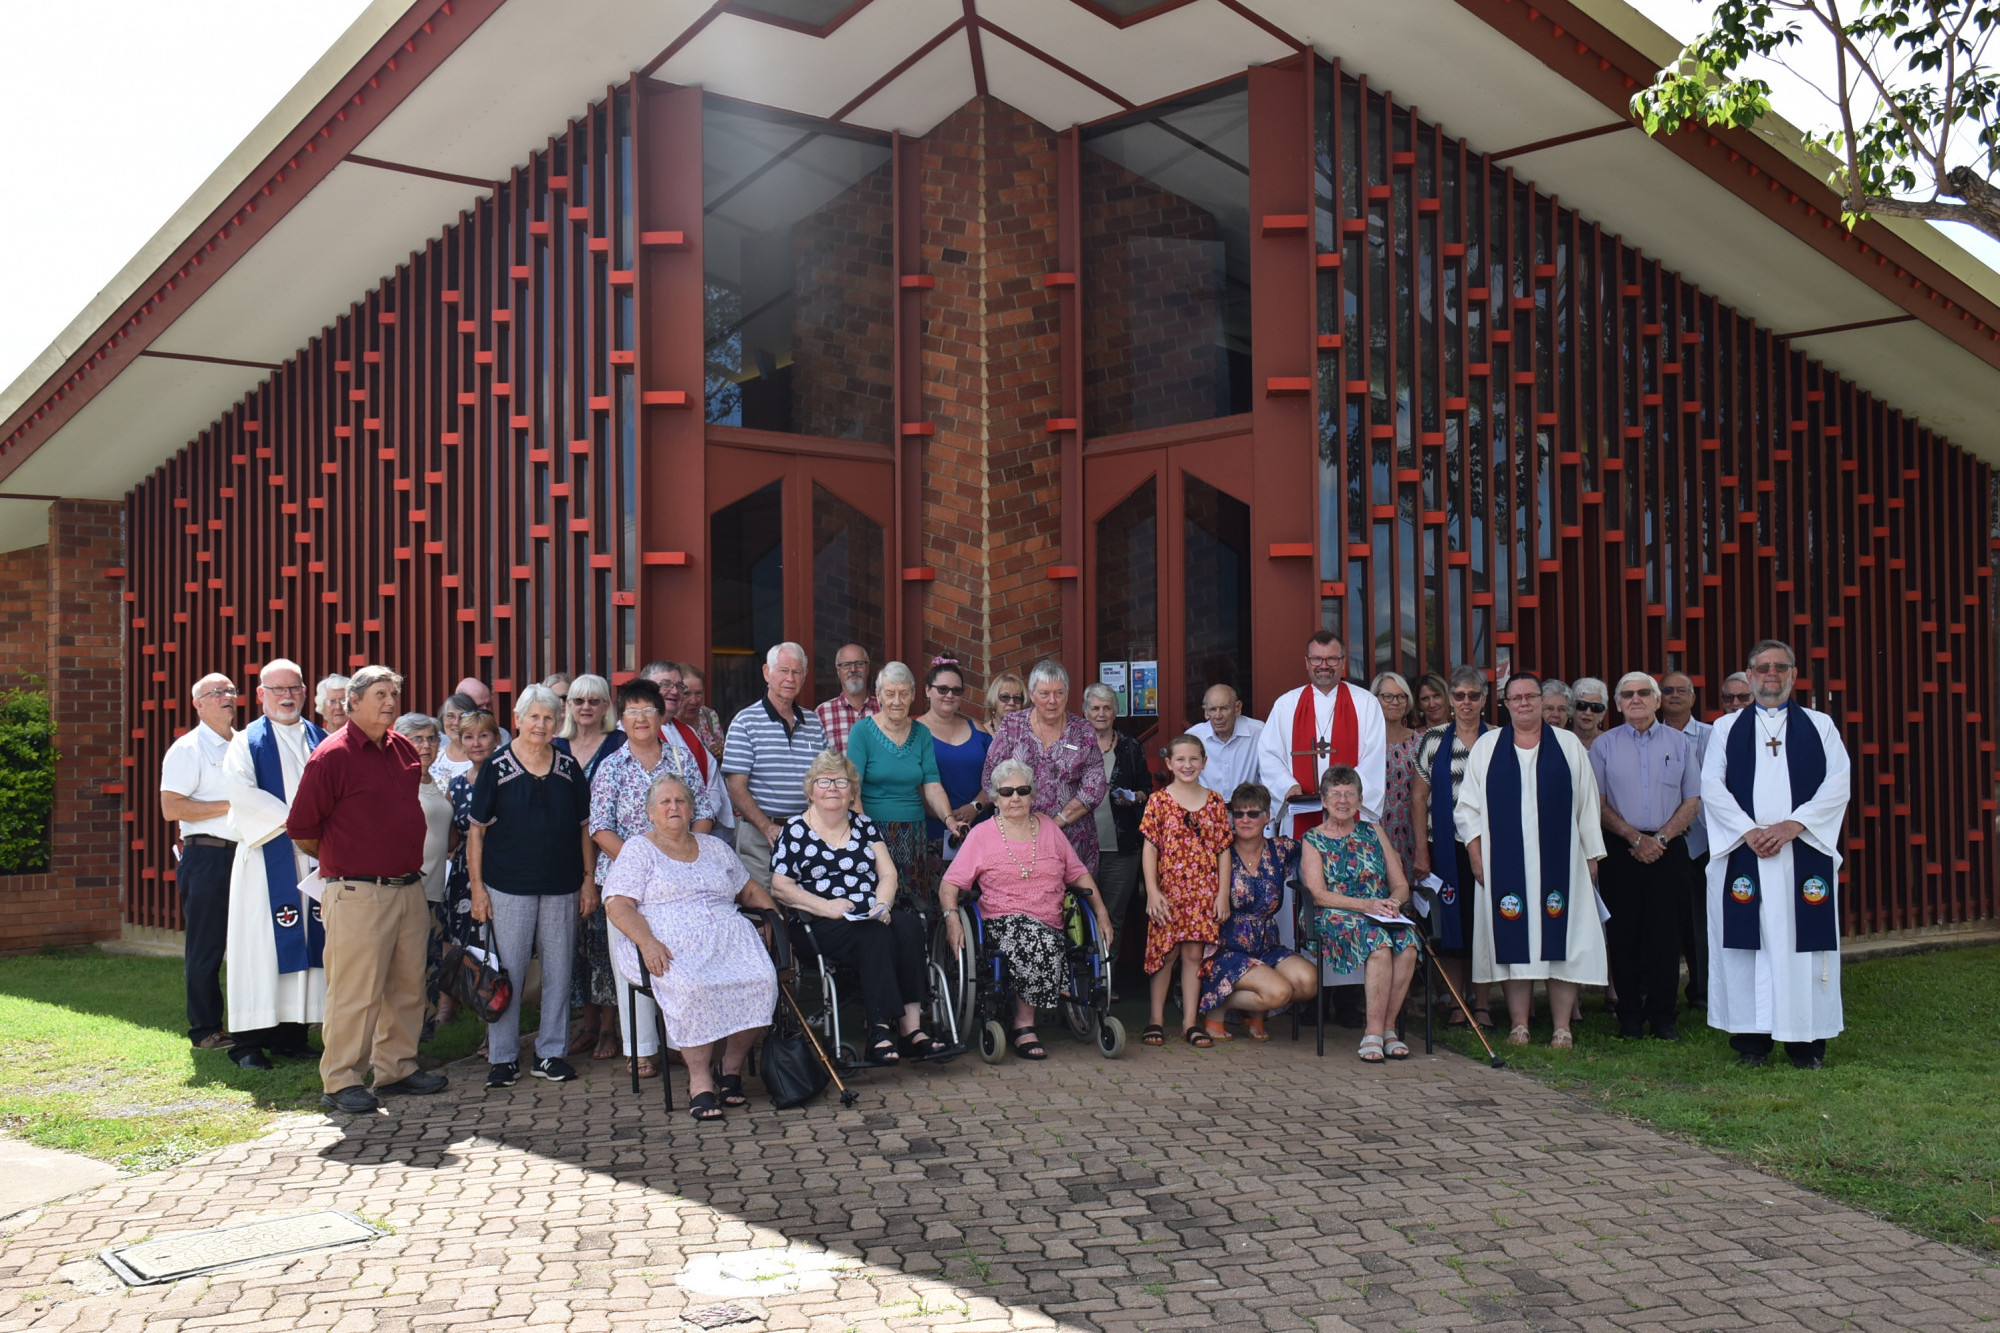 The last service at the Eddie Oribin designed Uniting Church in Mareeba, which is now one step closer to being Heritage listed.